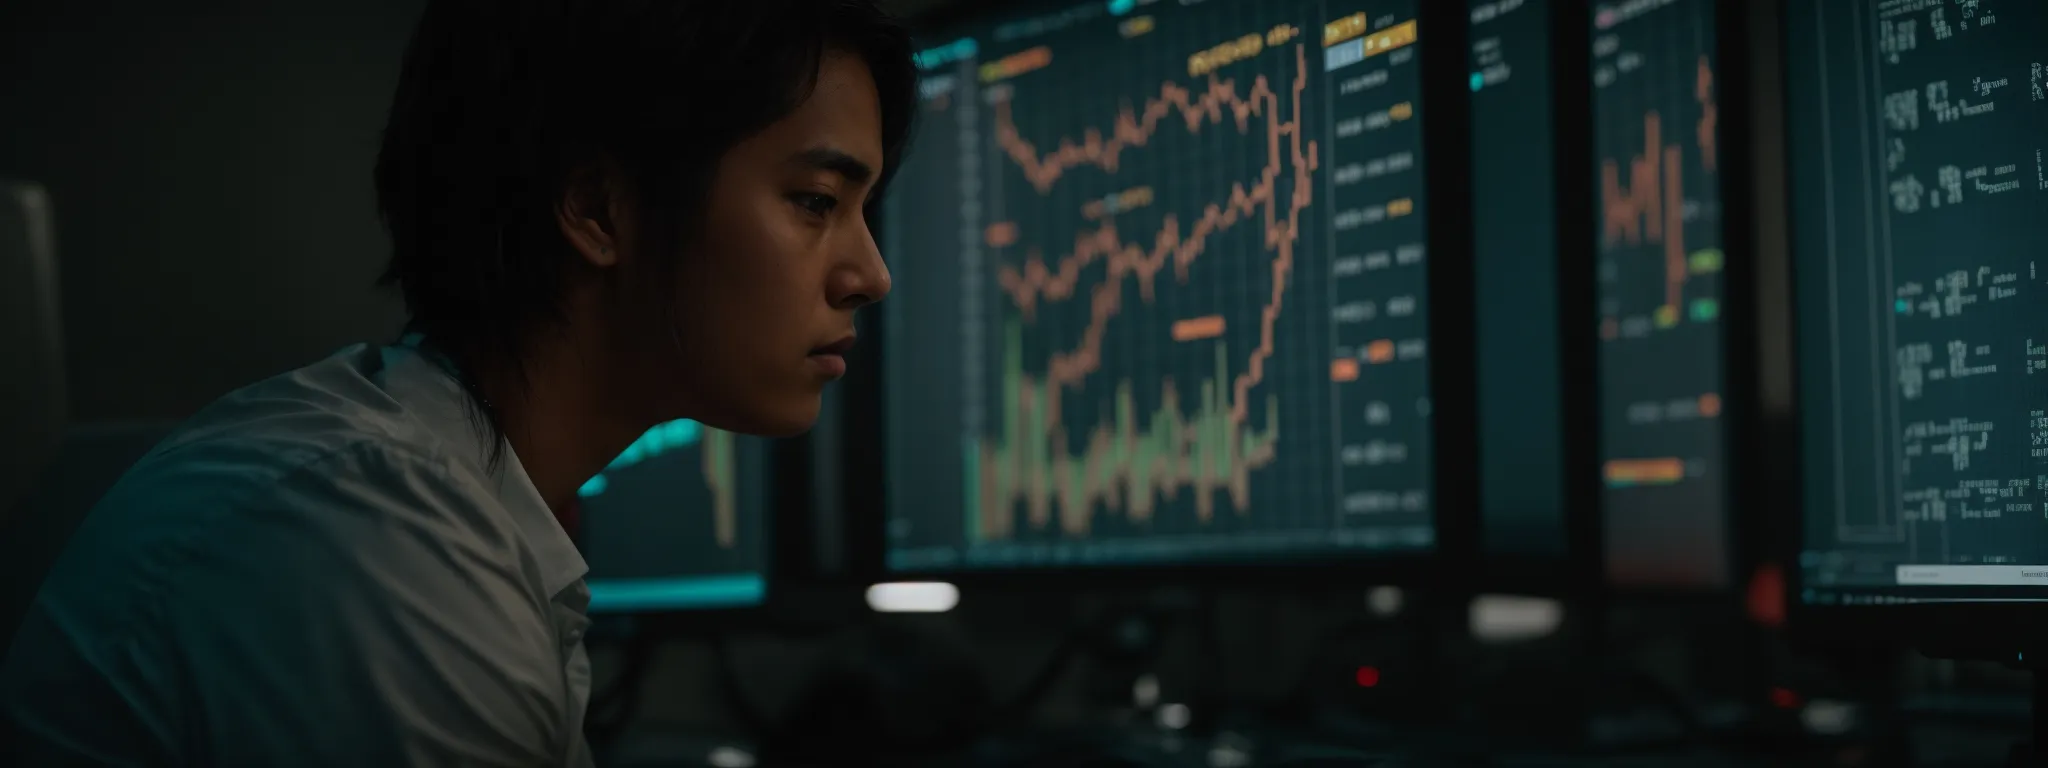 a professional staring intently at a computer screen, analyzing graphs that illustrate web traffic and sentiment analysis.